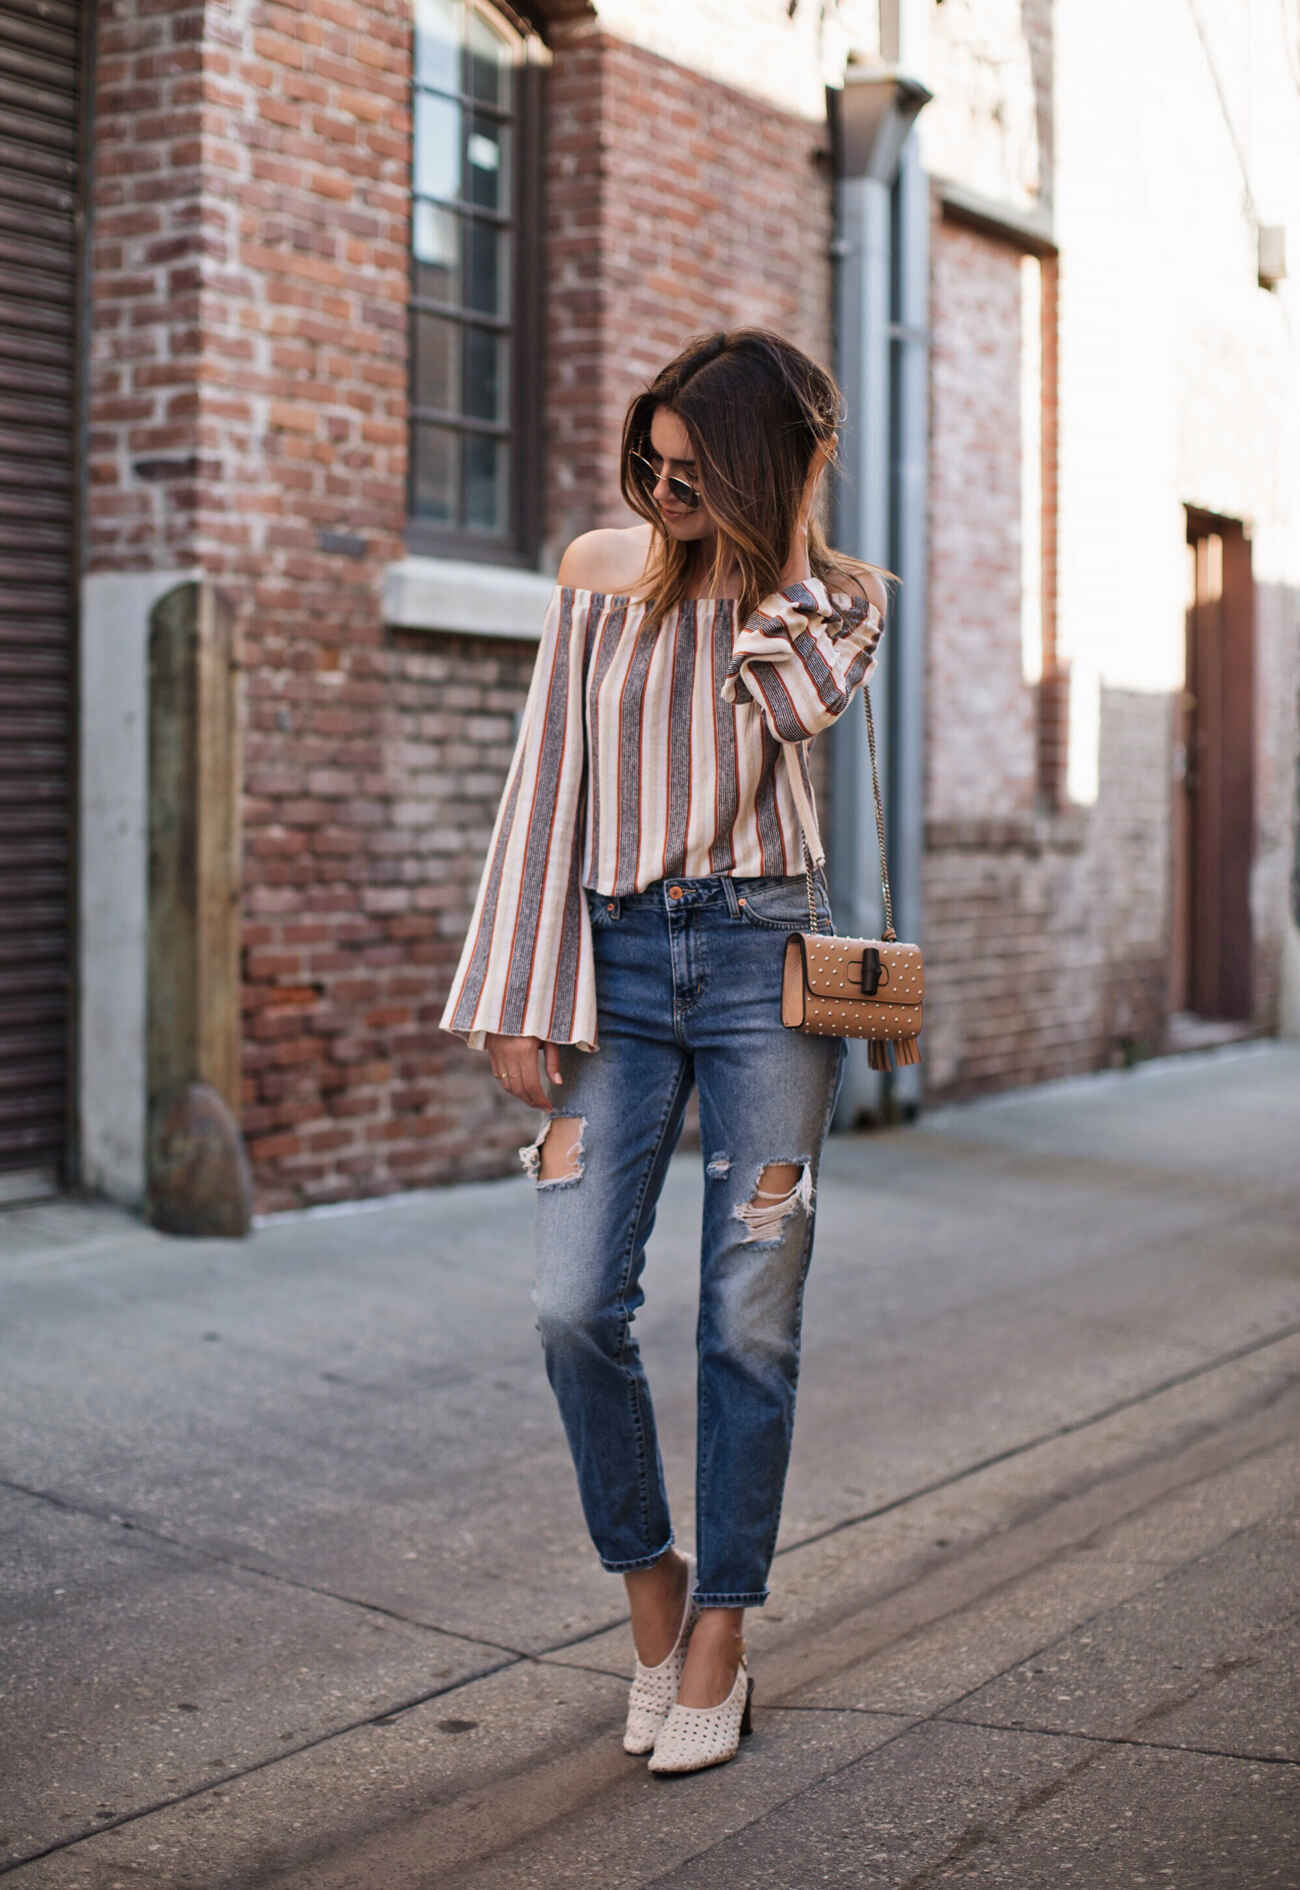 Bell Sleeves and Boyfriend Jeans